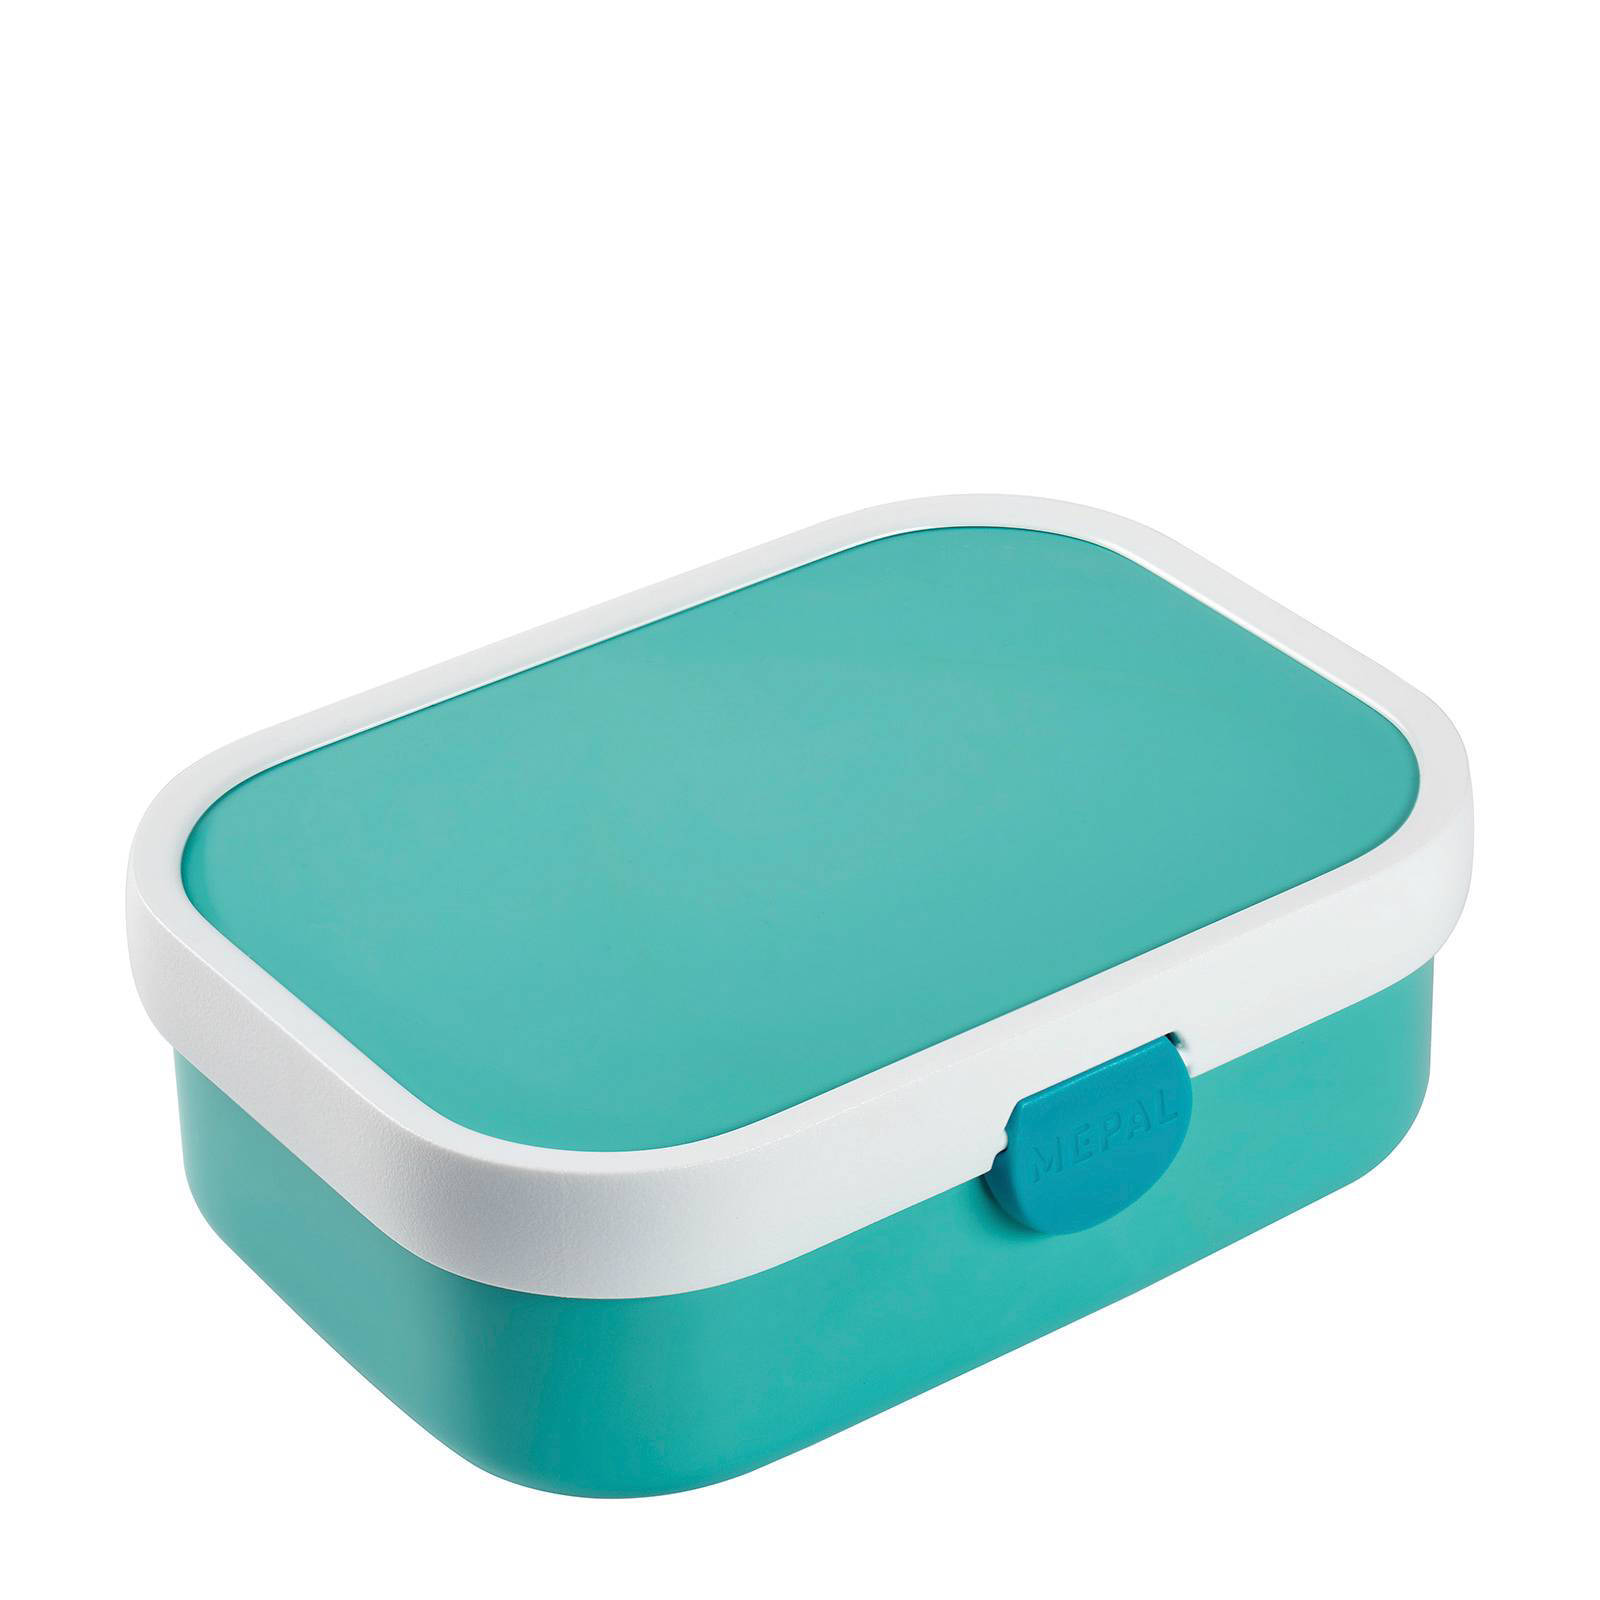 Mepal Campus lunchbox turquoise online kopen